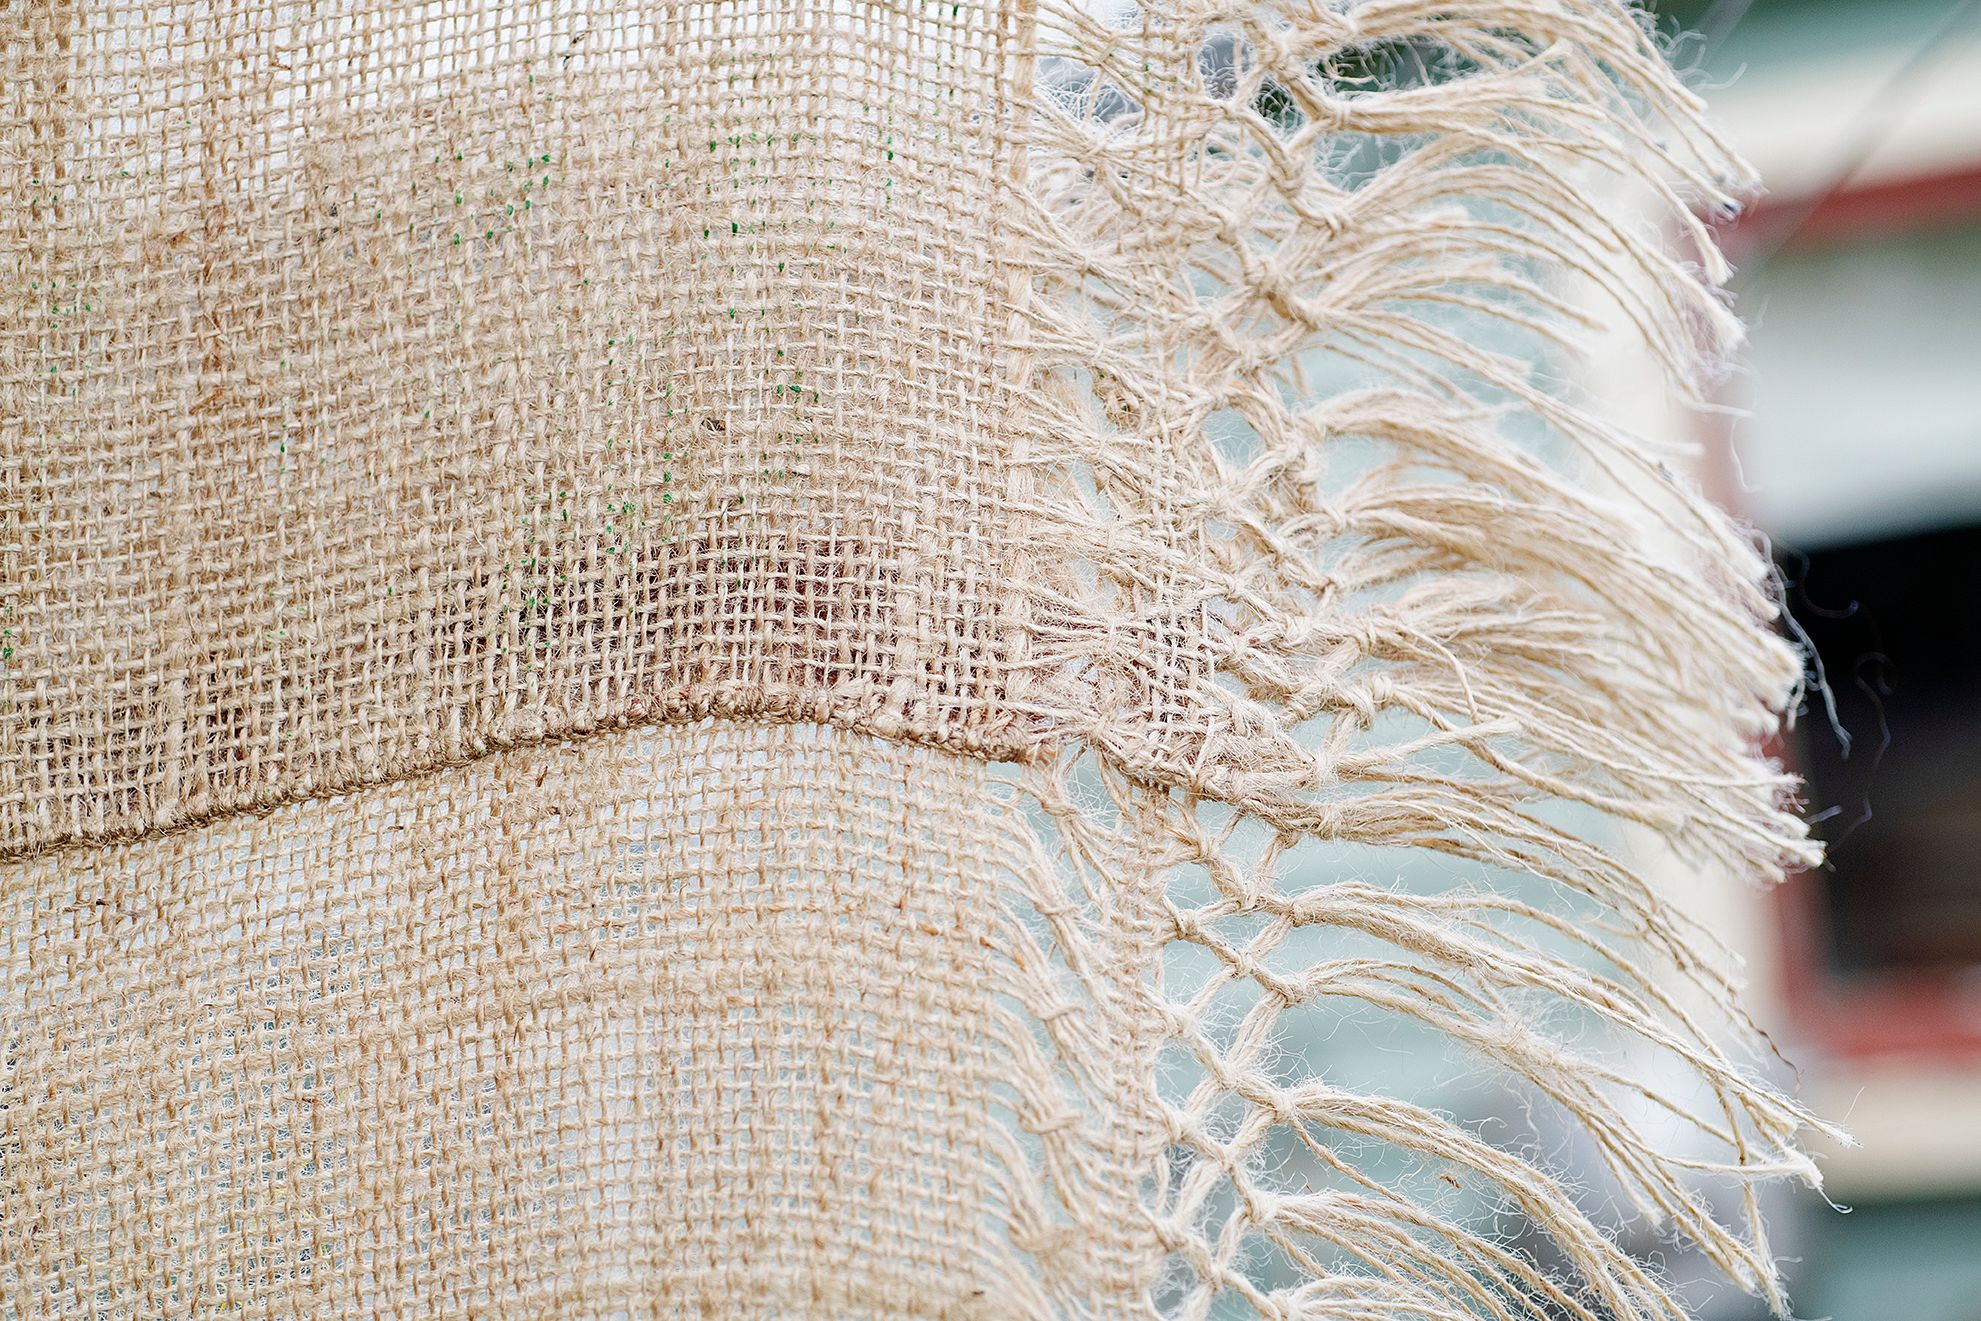 Quishile Charan, Burning Ganna Khet, 2021, cotton, embroidery thread, hessian sacks, natural dye: avocados, 153cm by 152cm. Close up of embroidery. Image taken by: Raymond Sagapolutele. 